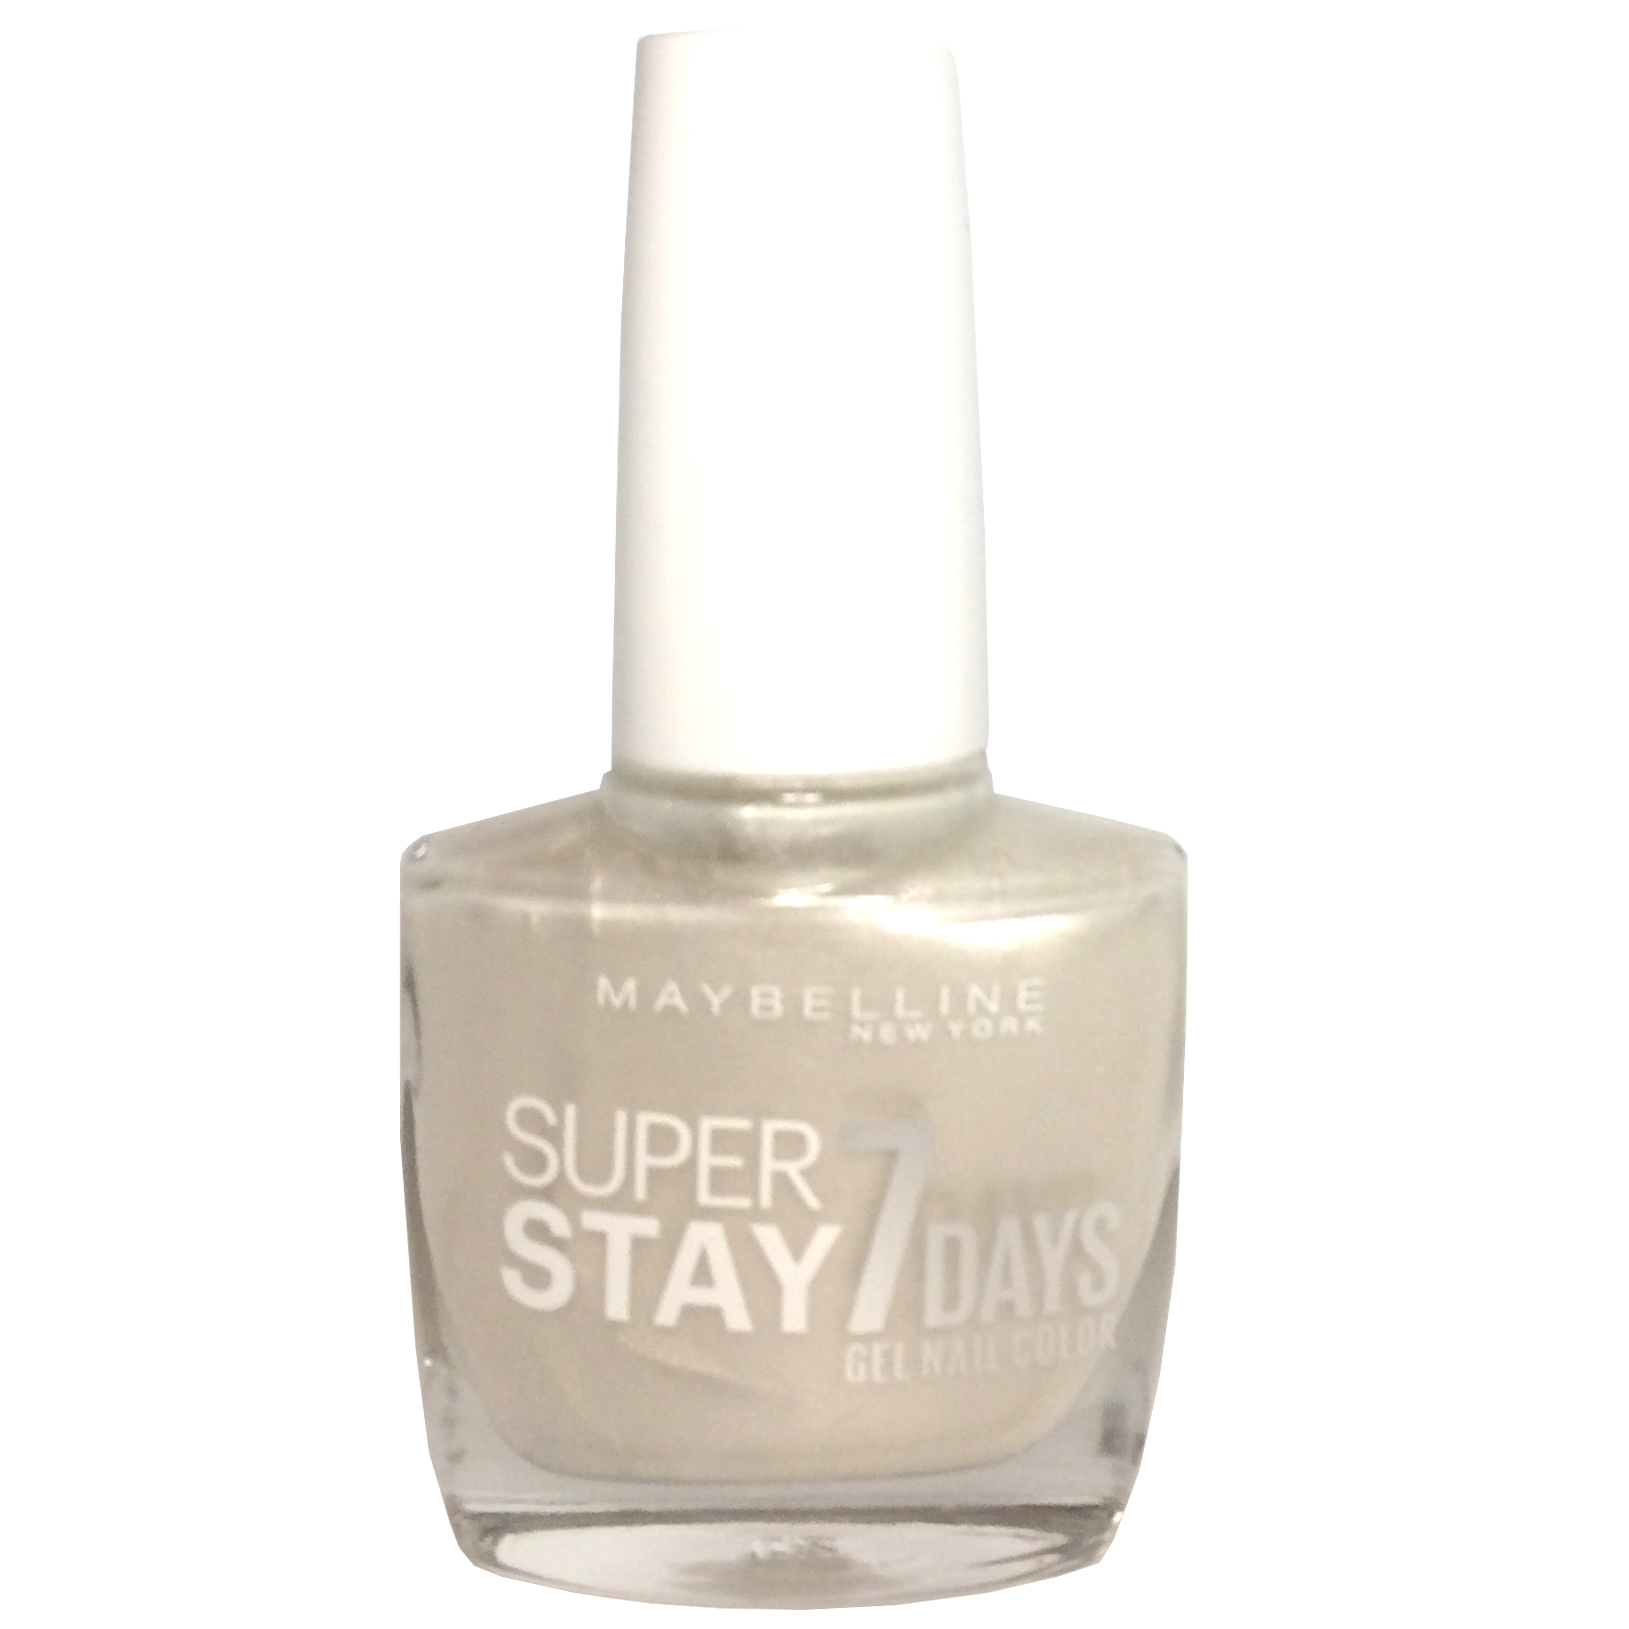 Maybelline Superstay 7 Days Gel Nail Polish - 77 Pearly White